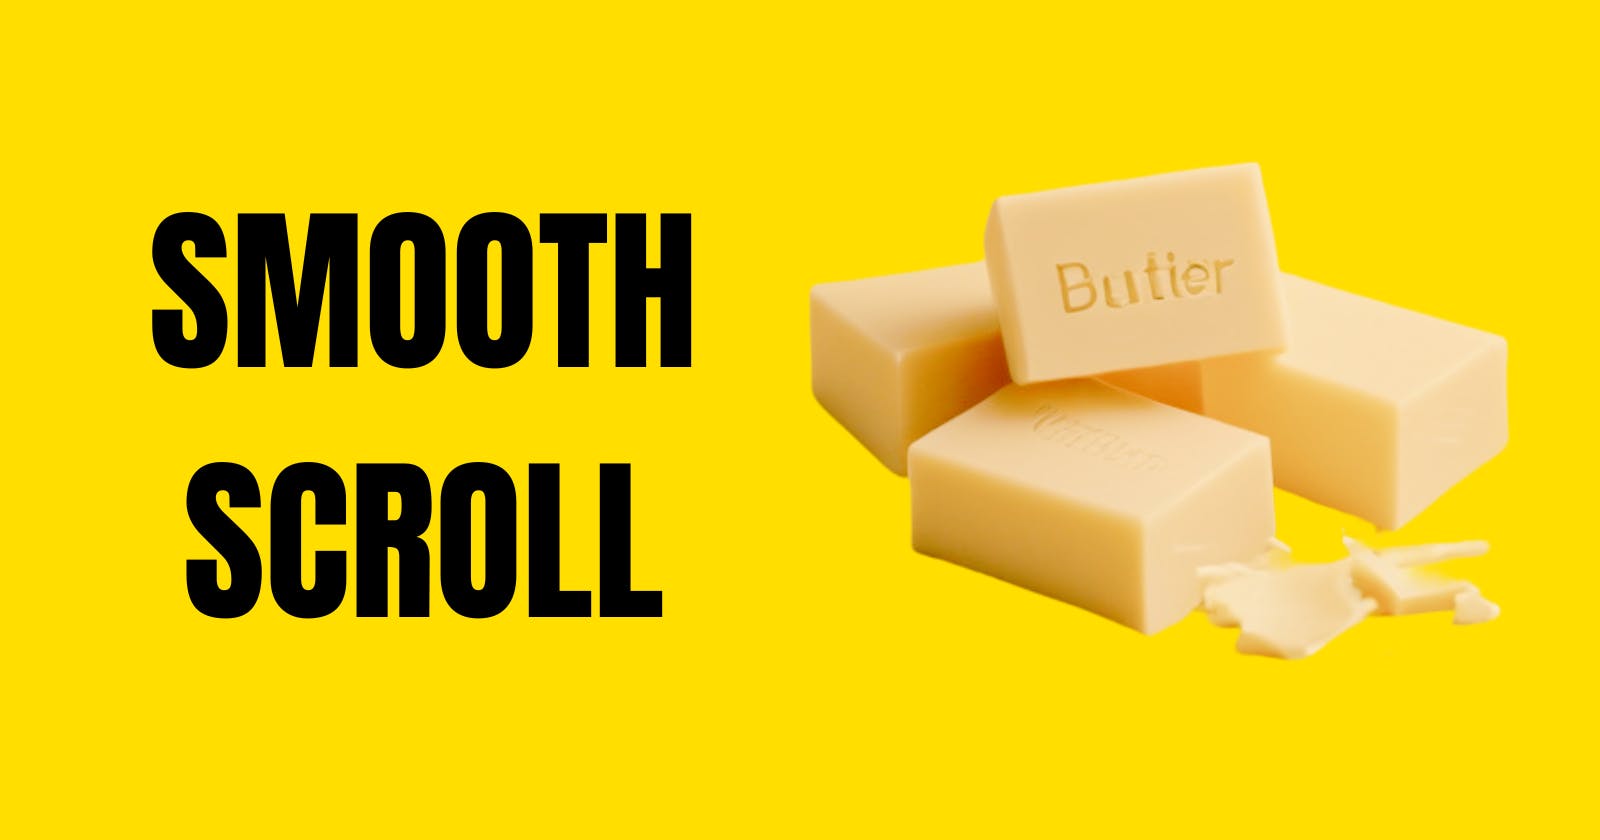 Buttery-Smooth Scrolling on your website in 2 minutes!